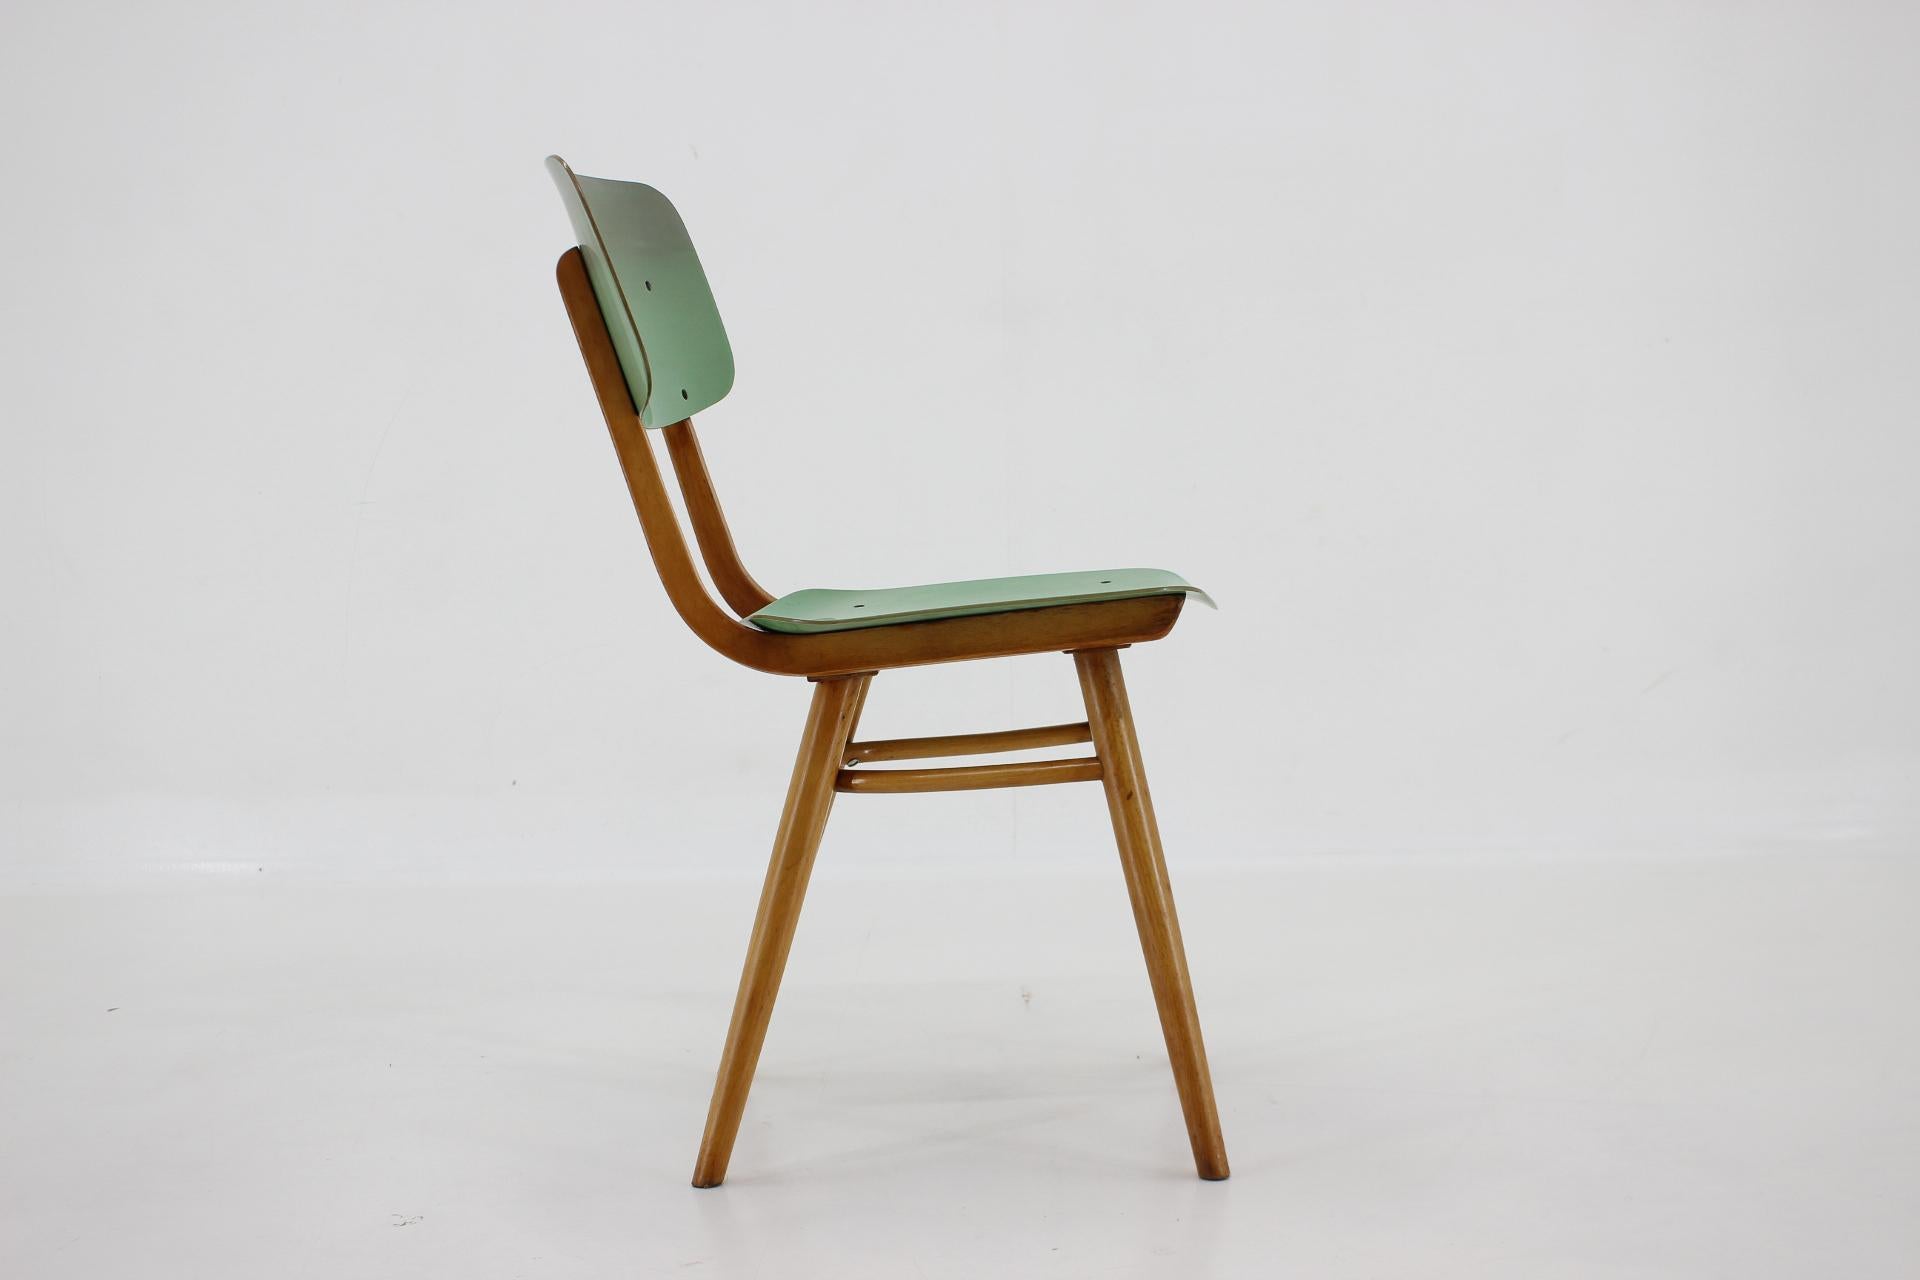 Vintage single chair made of wood and formica. Wooden parts were carefully refurbished.